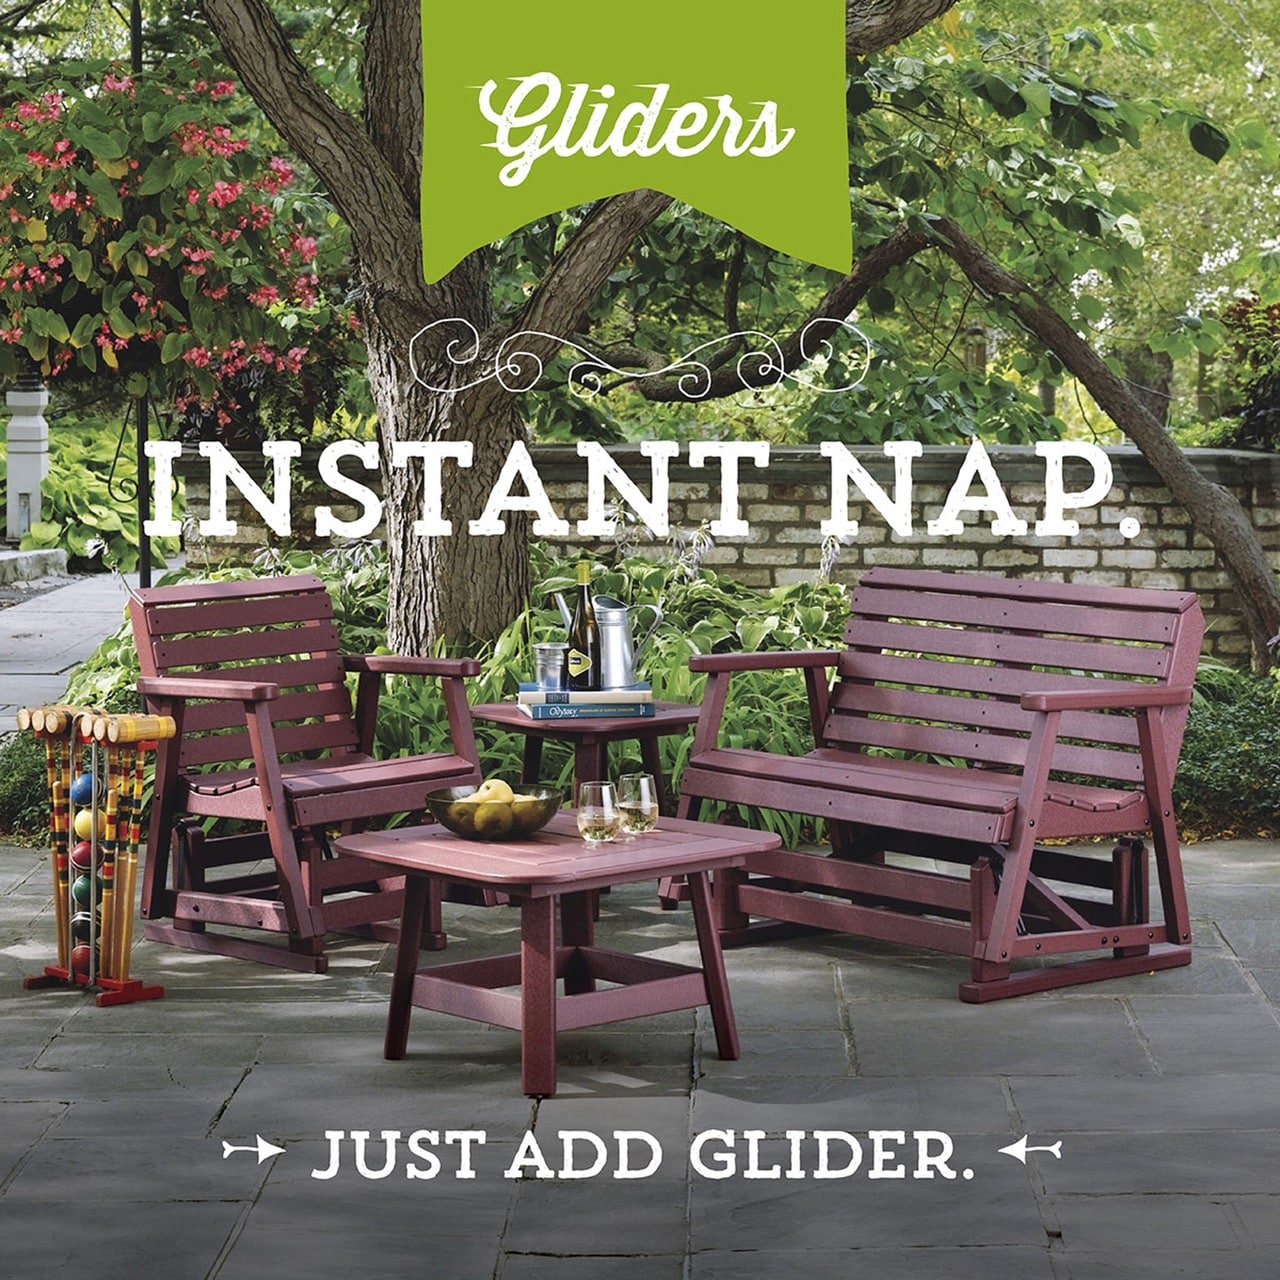 Gliders: a perfect addition to your outdoor oasis